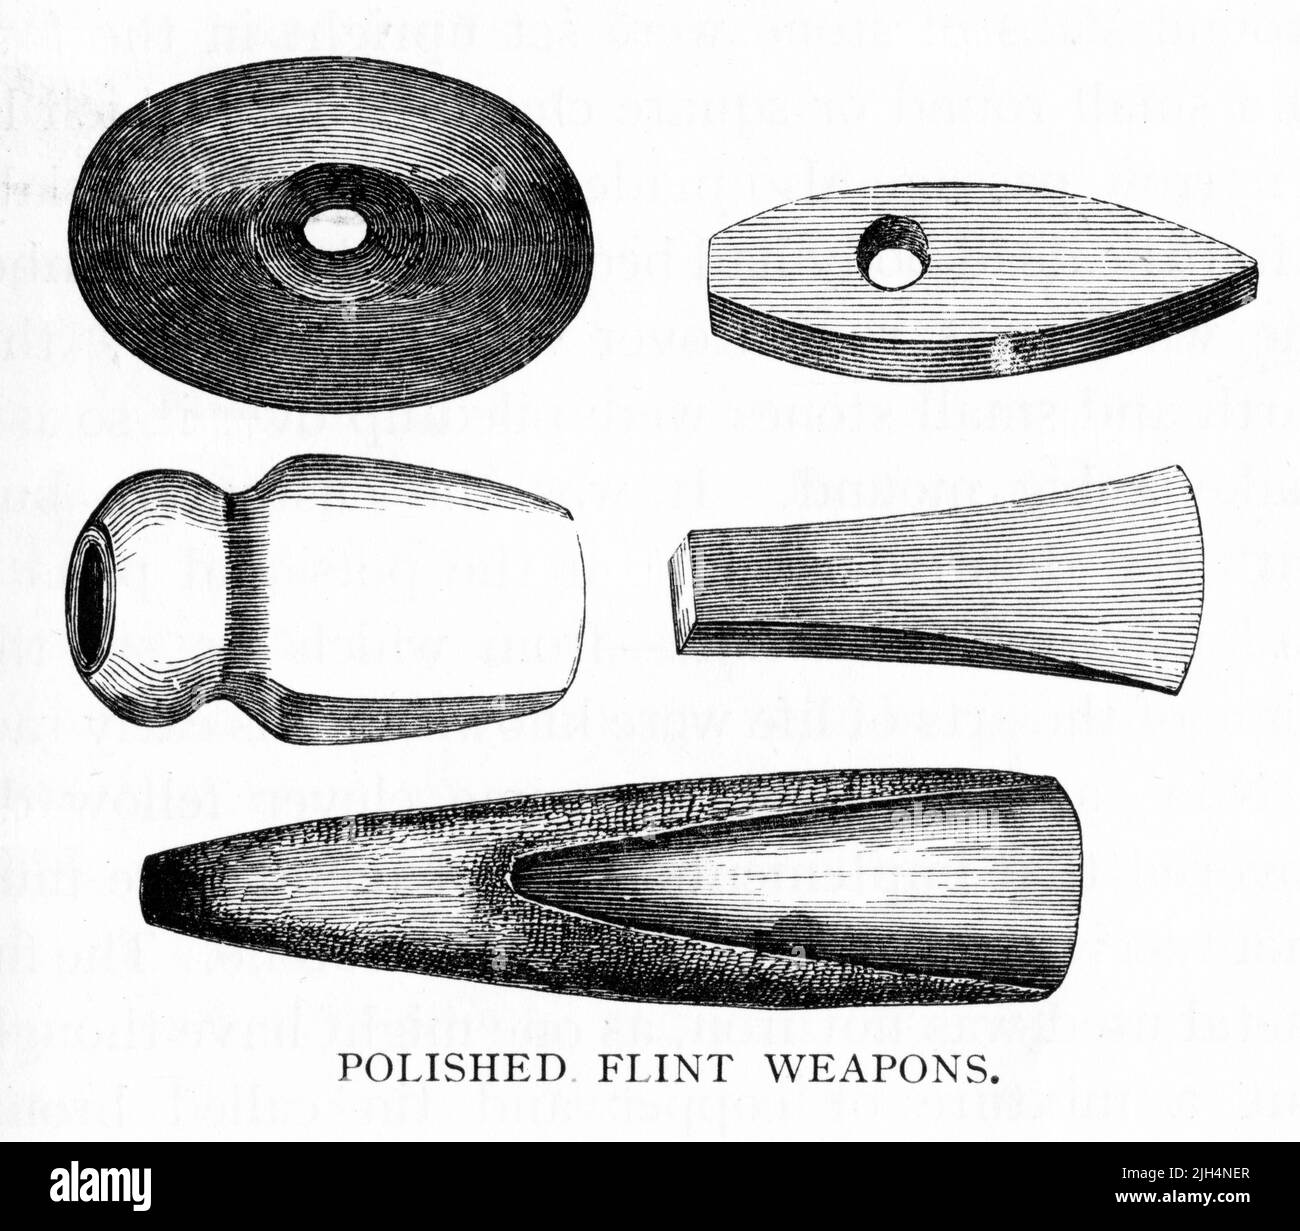 Engraving of polished flint weapons found near Bath, England Stock Photo